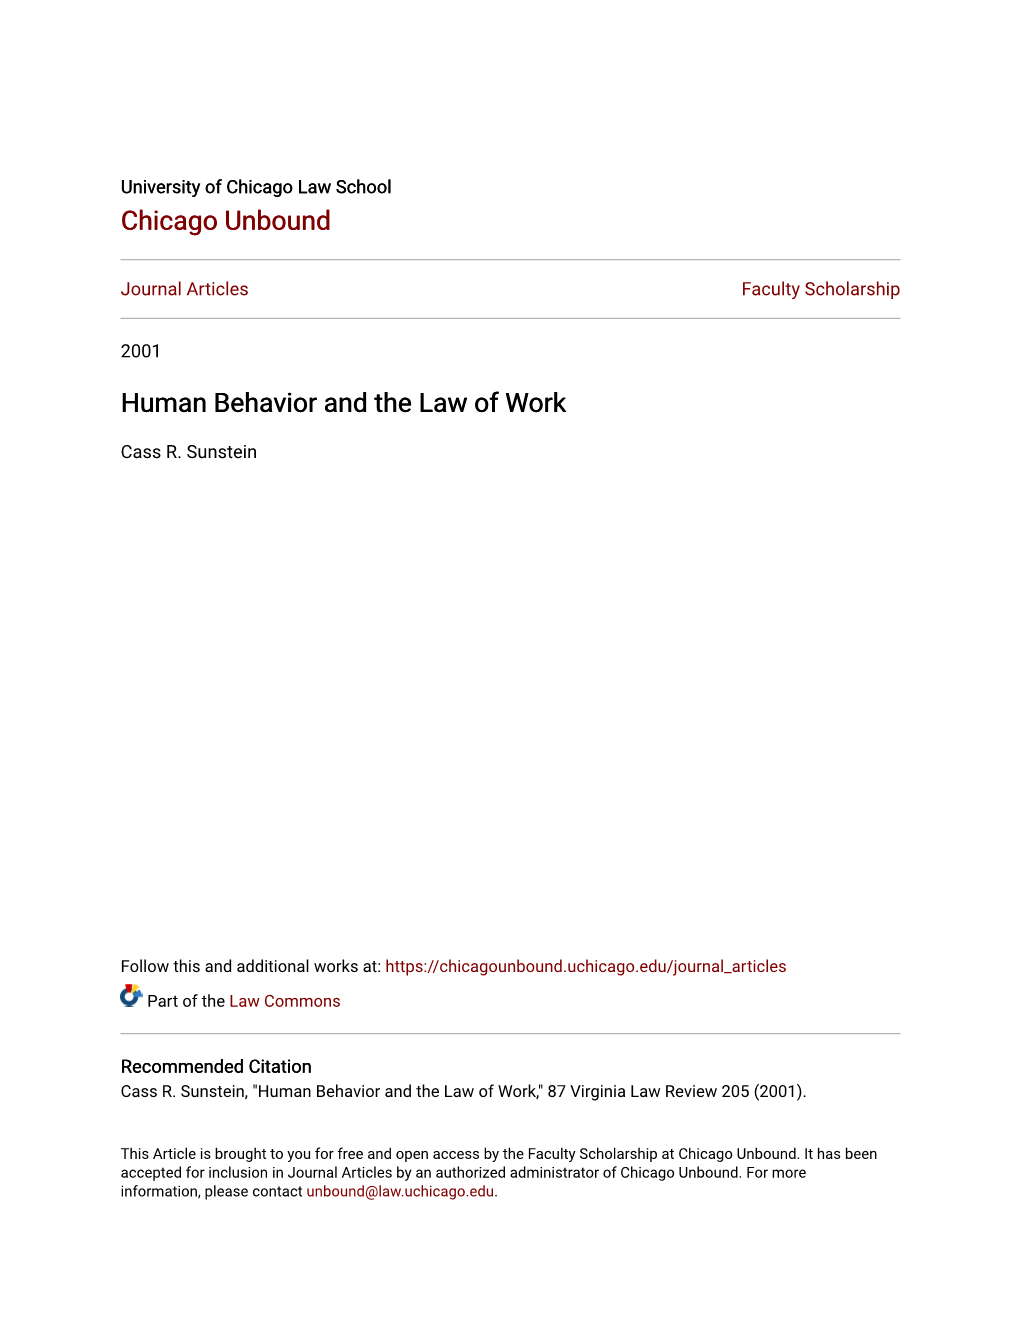 Human Behavior and the Law of Work